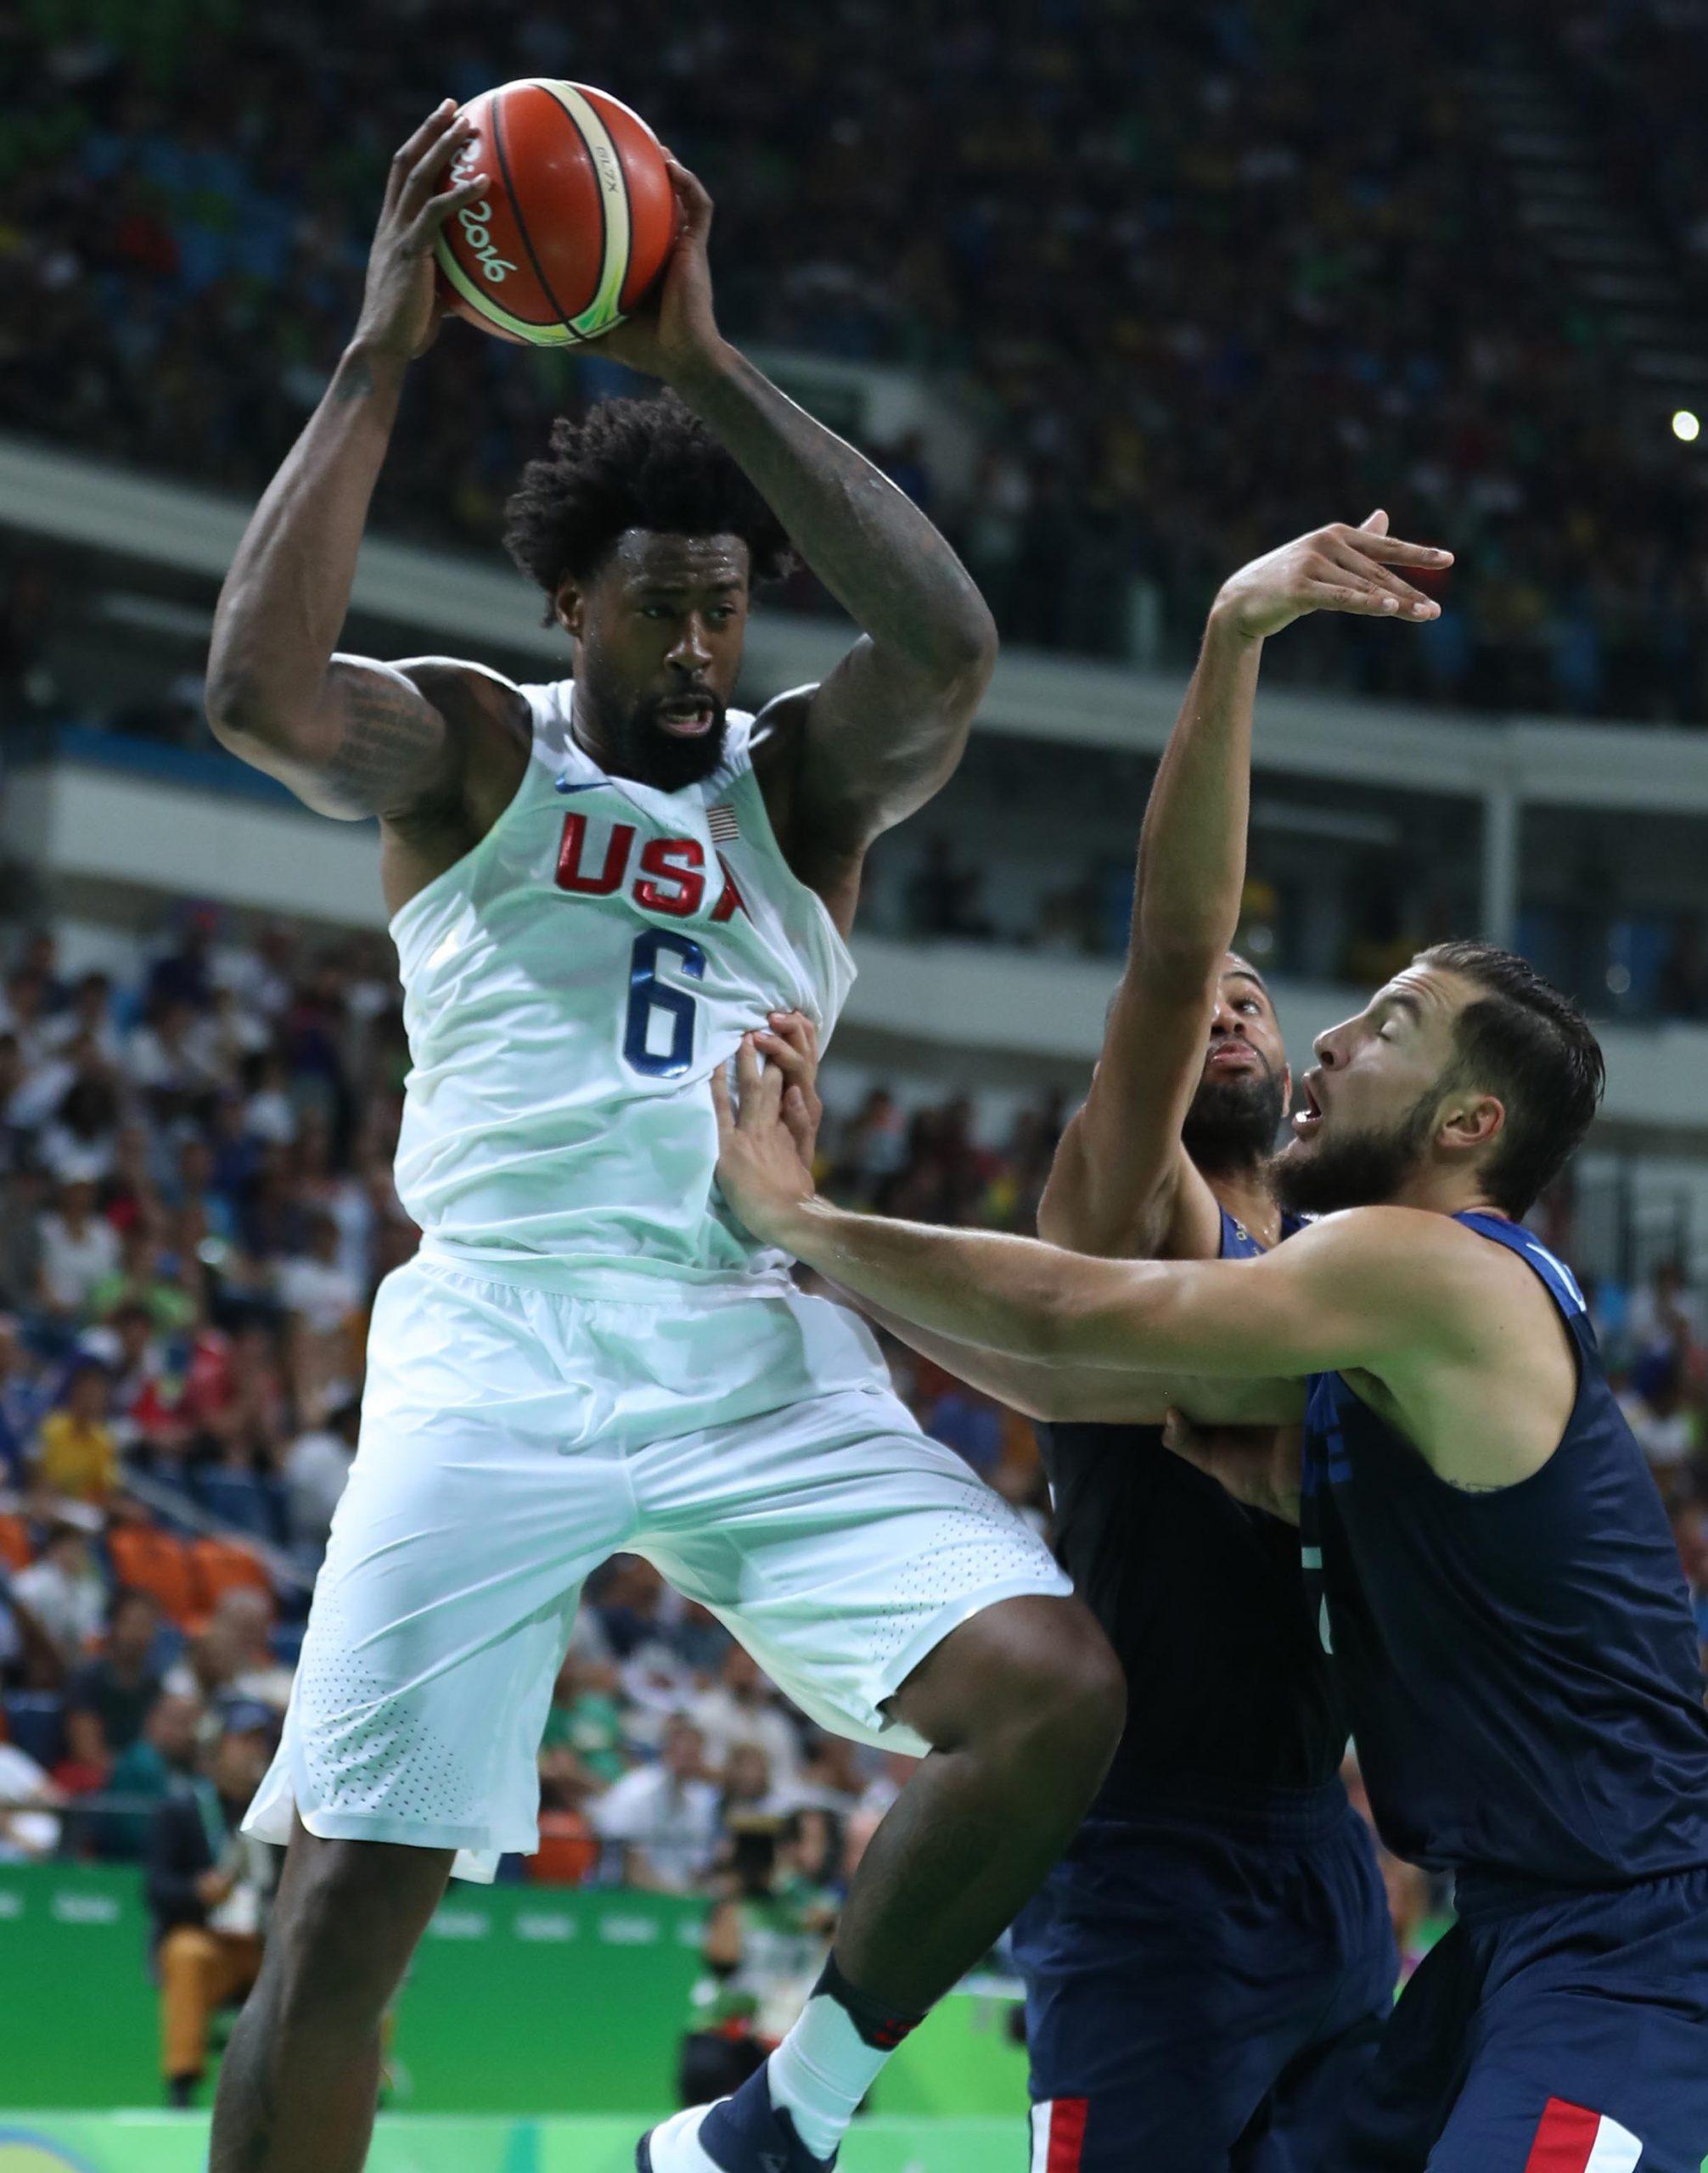 DeAndre Jordan, left, of the U.S. mens basketball team competes during a mens preliminary round match against France on Sunday, Aug. 14, 2016 at the 2016 Rio Olympic Games in Rio de Janeiro, Brazil. The U.S. won 100-97. (Meng Yongmin/Xinhua/Zuma Press/TNS)